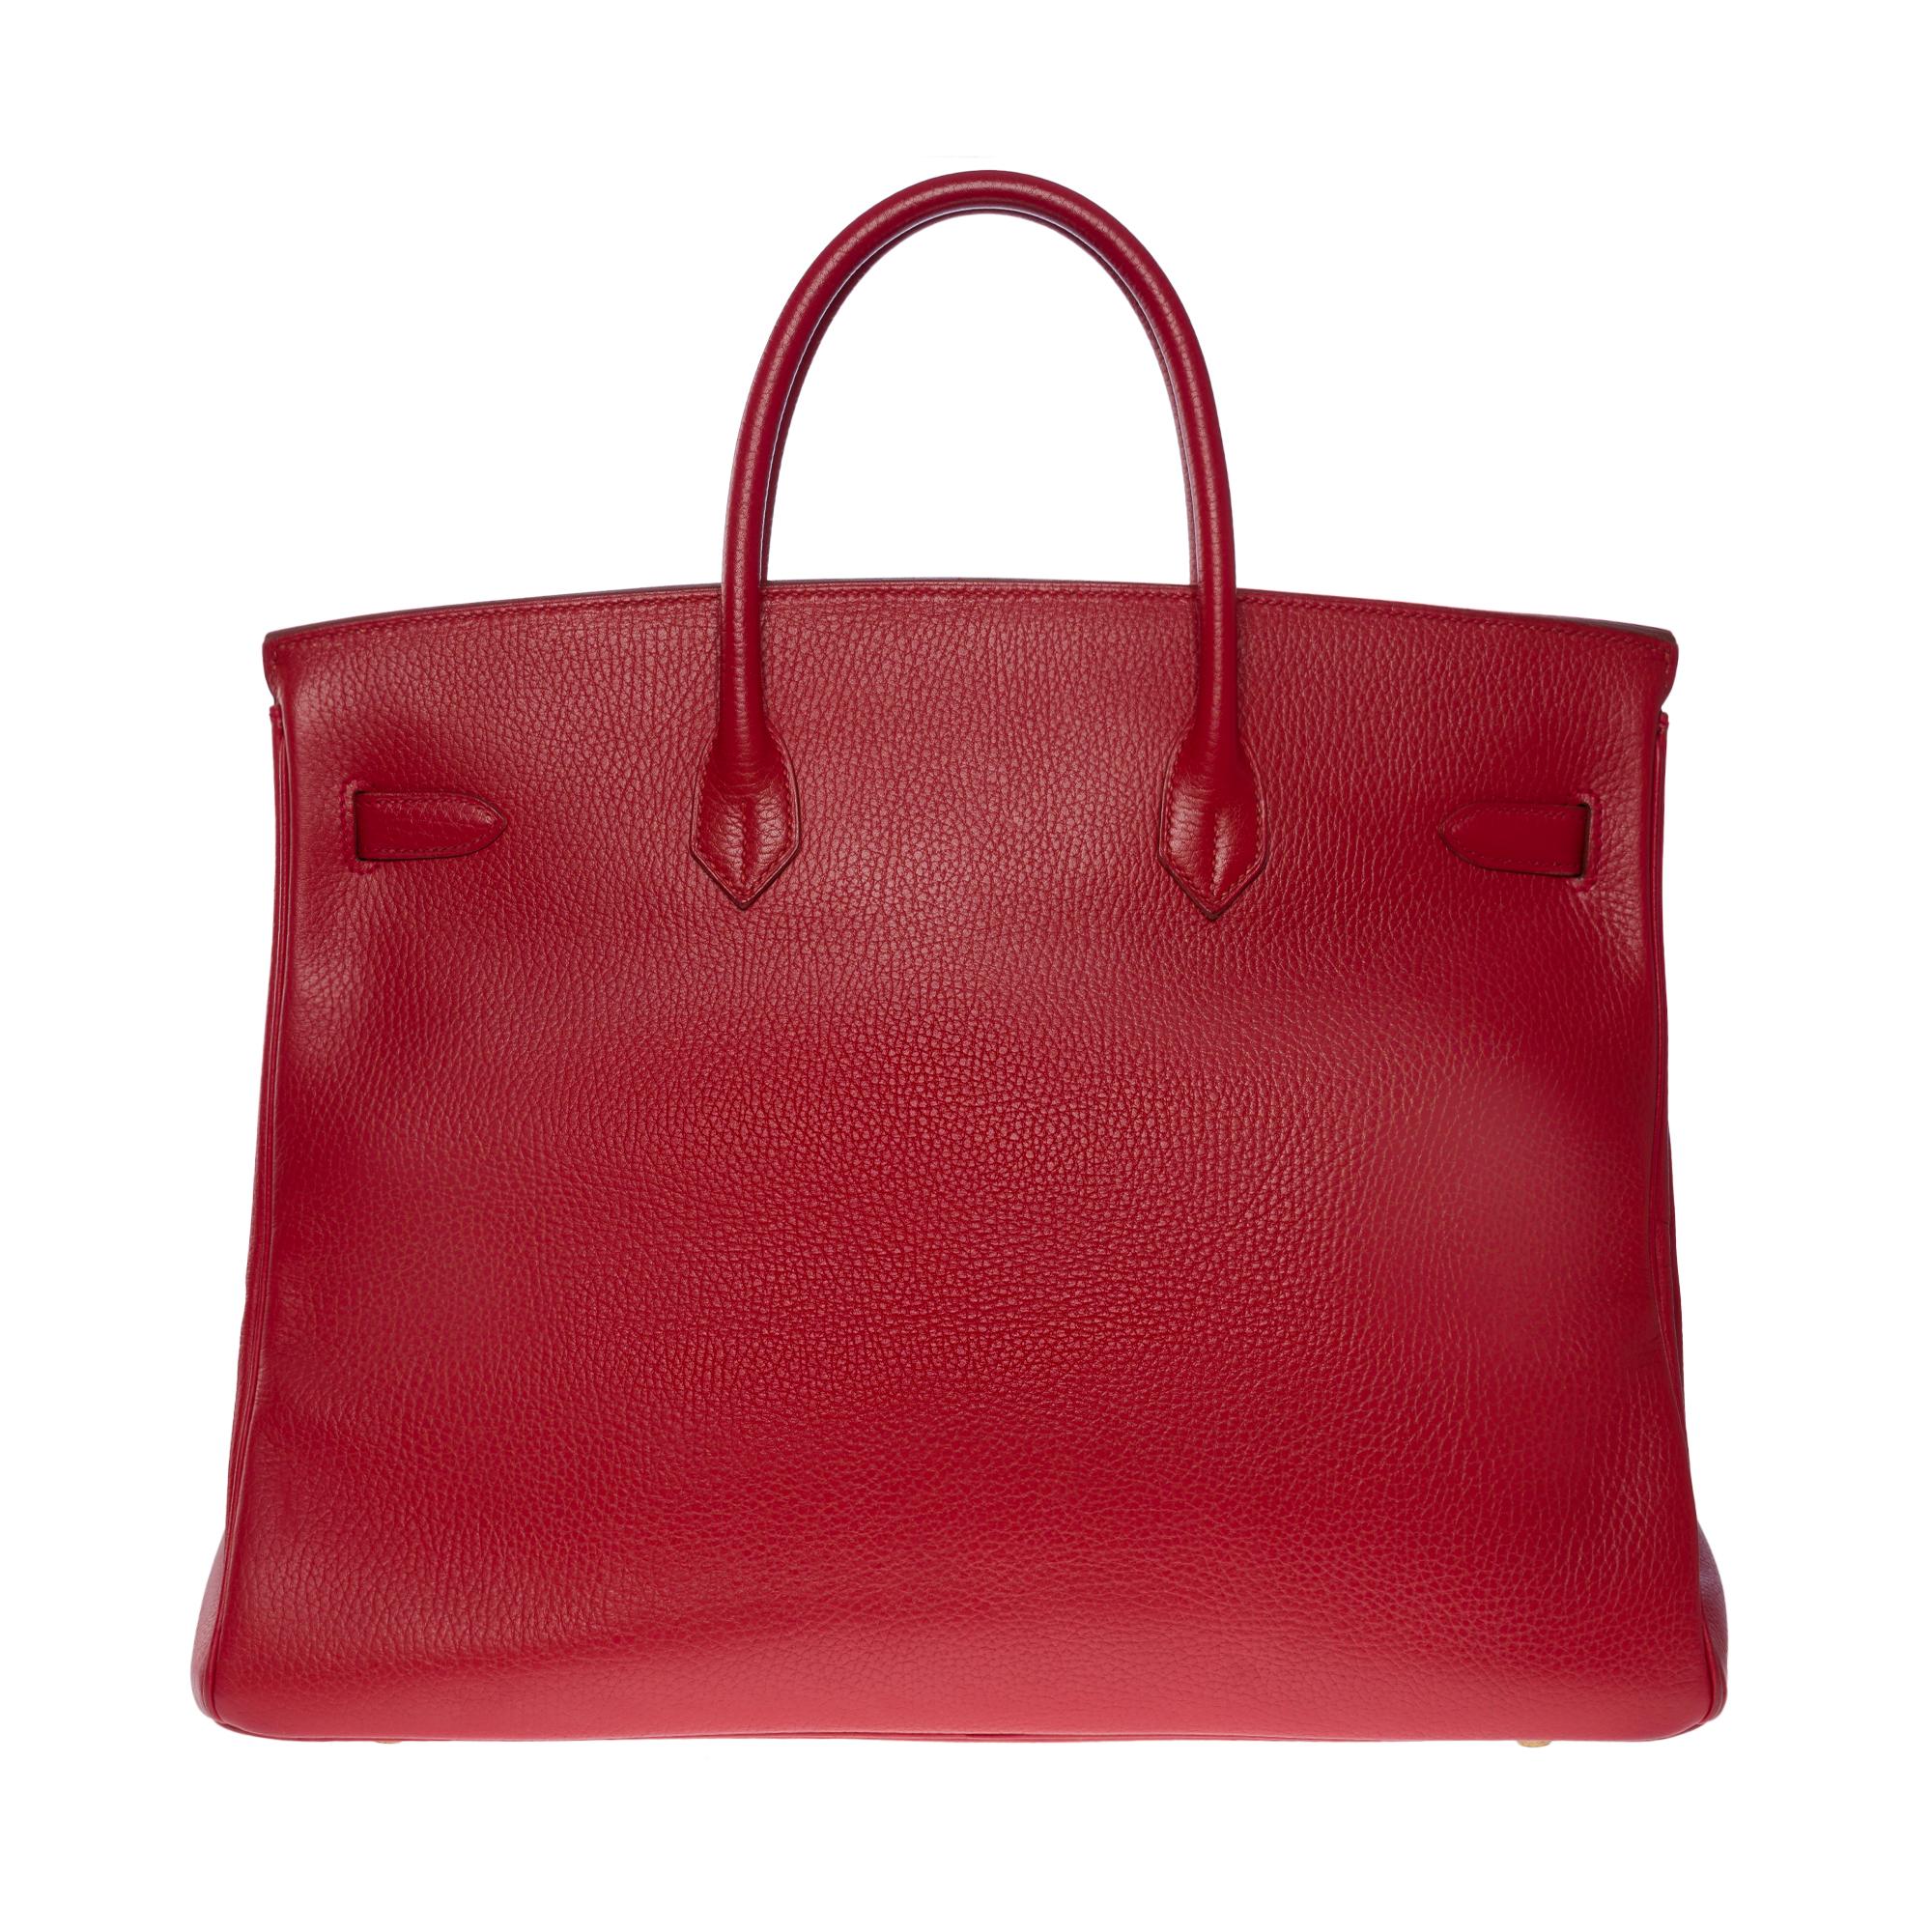 Rare & Collector Hermes Birkin 40cm handbag in Red Vache Ardennes leather, GHW In Good Condition For Sale In Paris, IDF